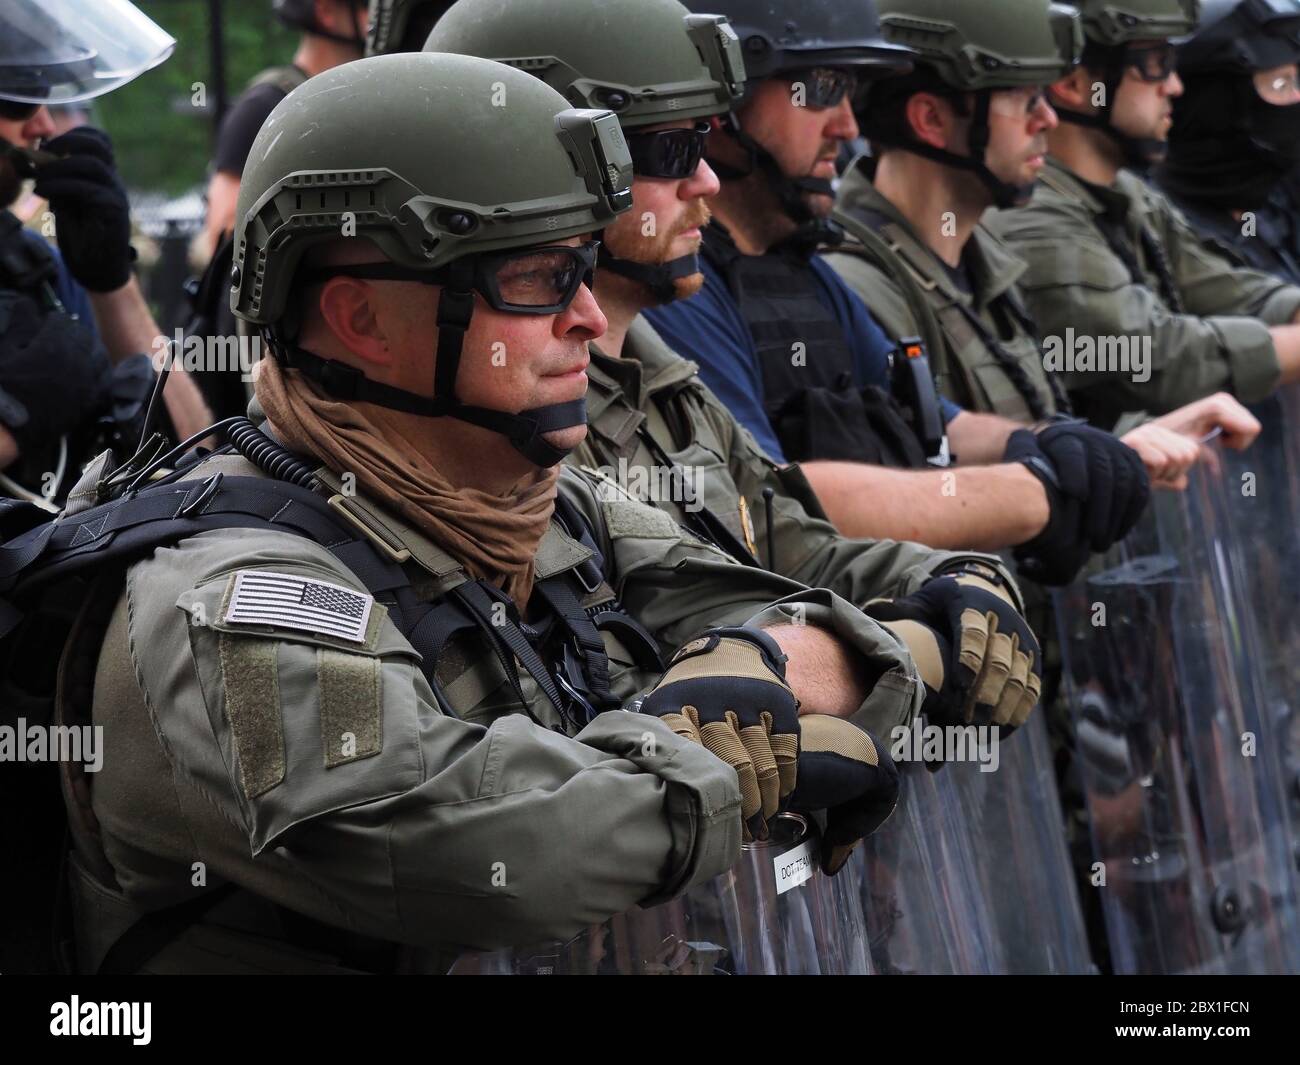 Washington, District of Columbia, USA. 3rd June, 2020. Members of the Bureau of Prisons Disturbance Control Team form a corridor to prevent protesters from assembling in front of Lafayette Park, the location of Monday nightÃs tear gassing. The BoP DCT mission normally is to control riots in prisons. Credit: Sue Dorfman/ZUMA Wire/Alamy Live News Stock Photo